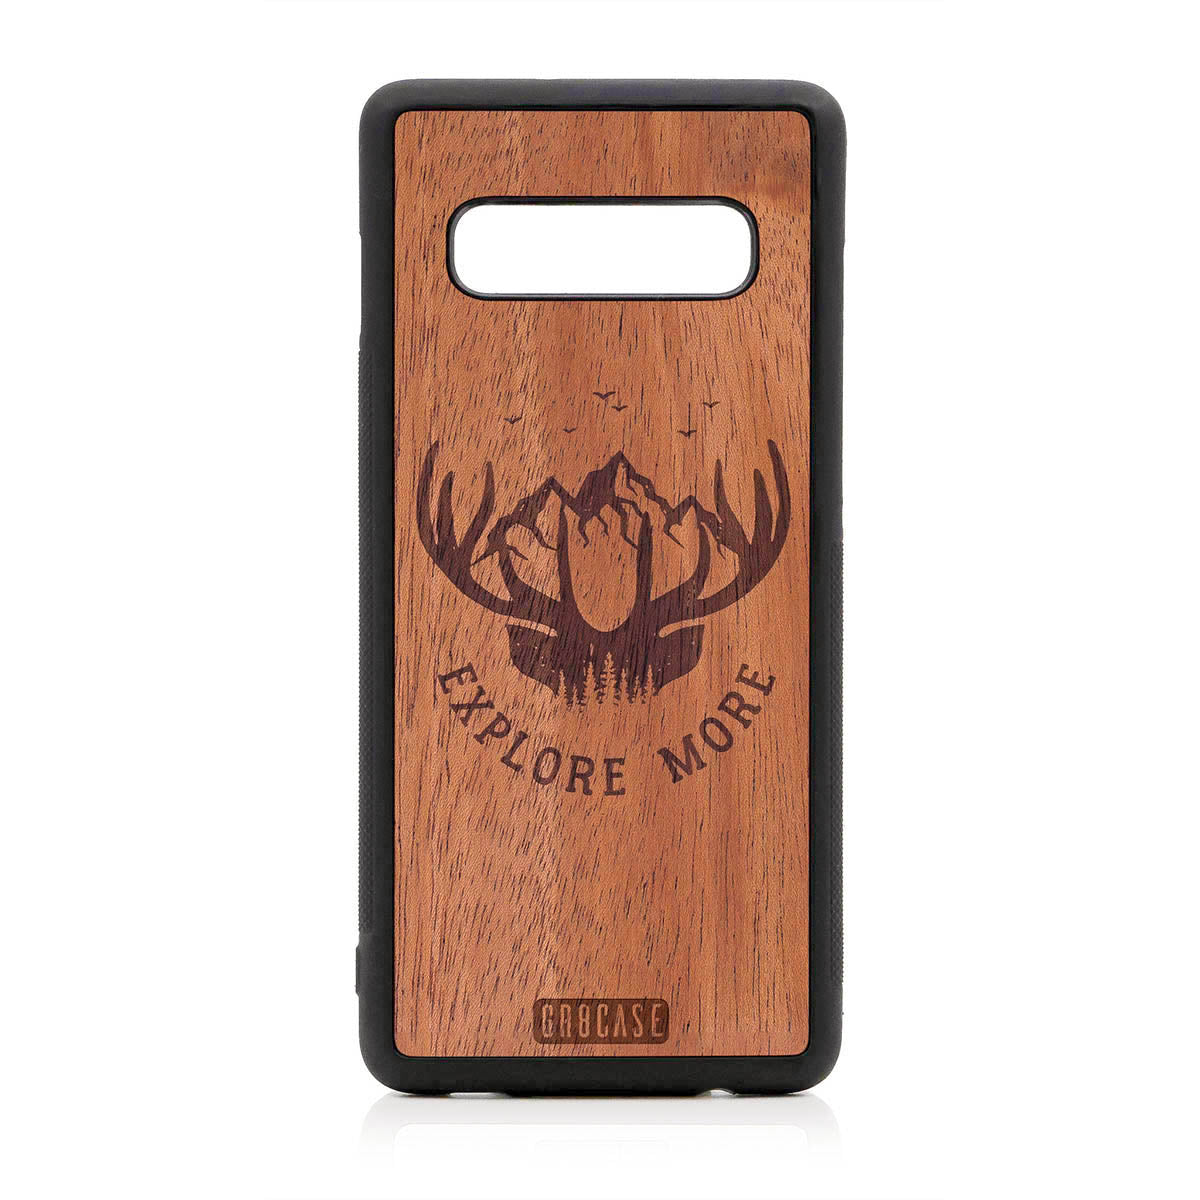 Explore More (Forest, Mountains & Antlers) Design Wood Case For Samsung Galaxy S10 Plus by GR8CASE